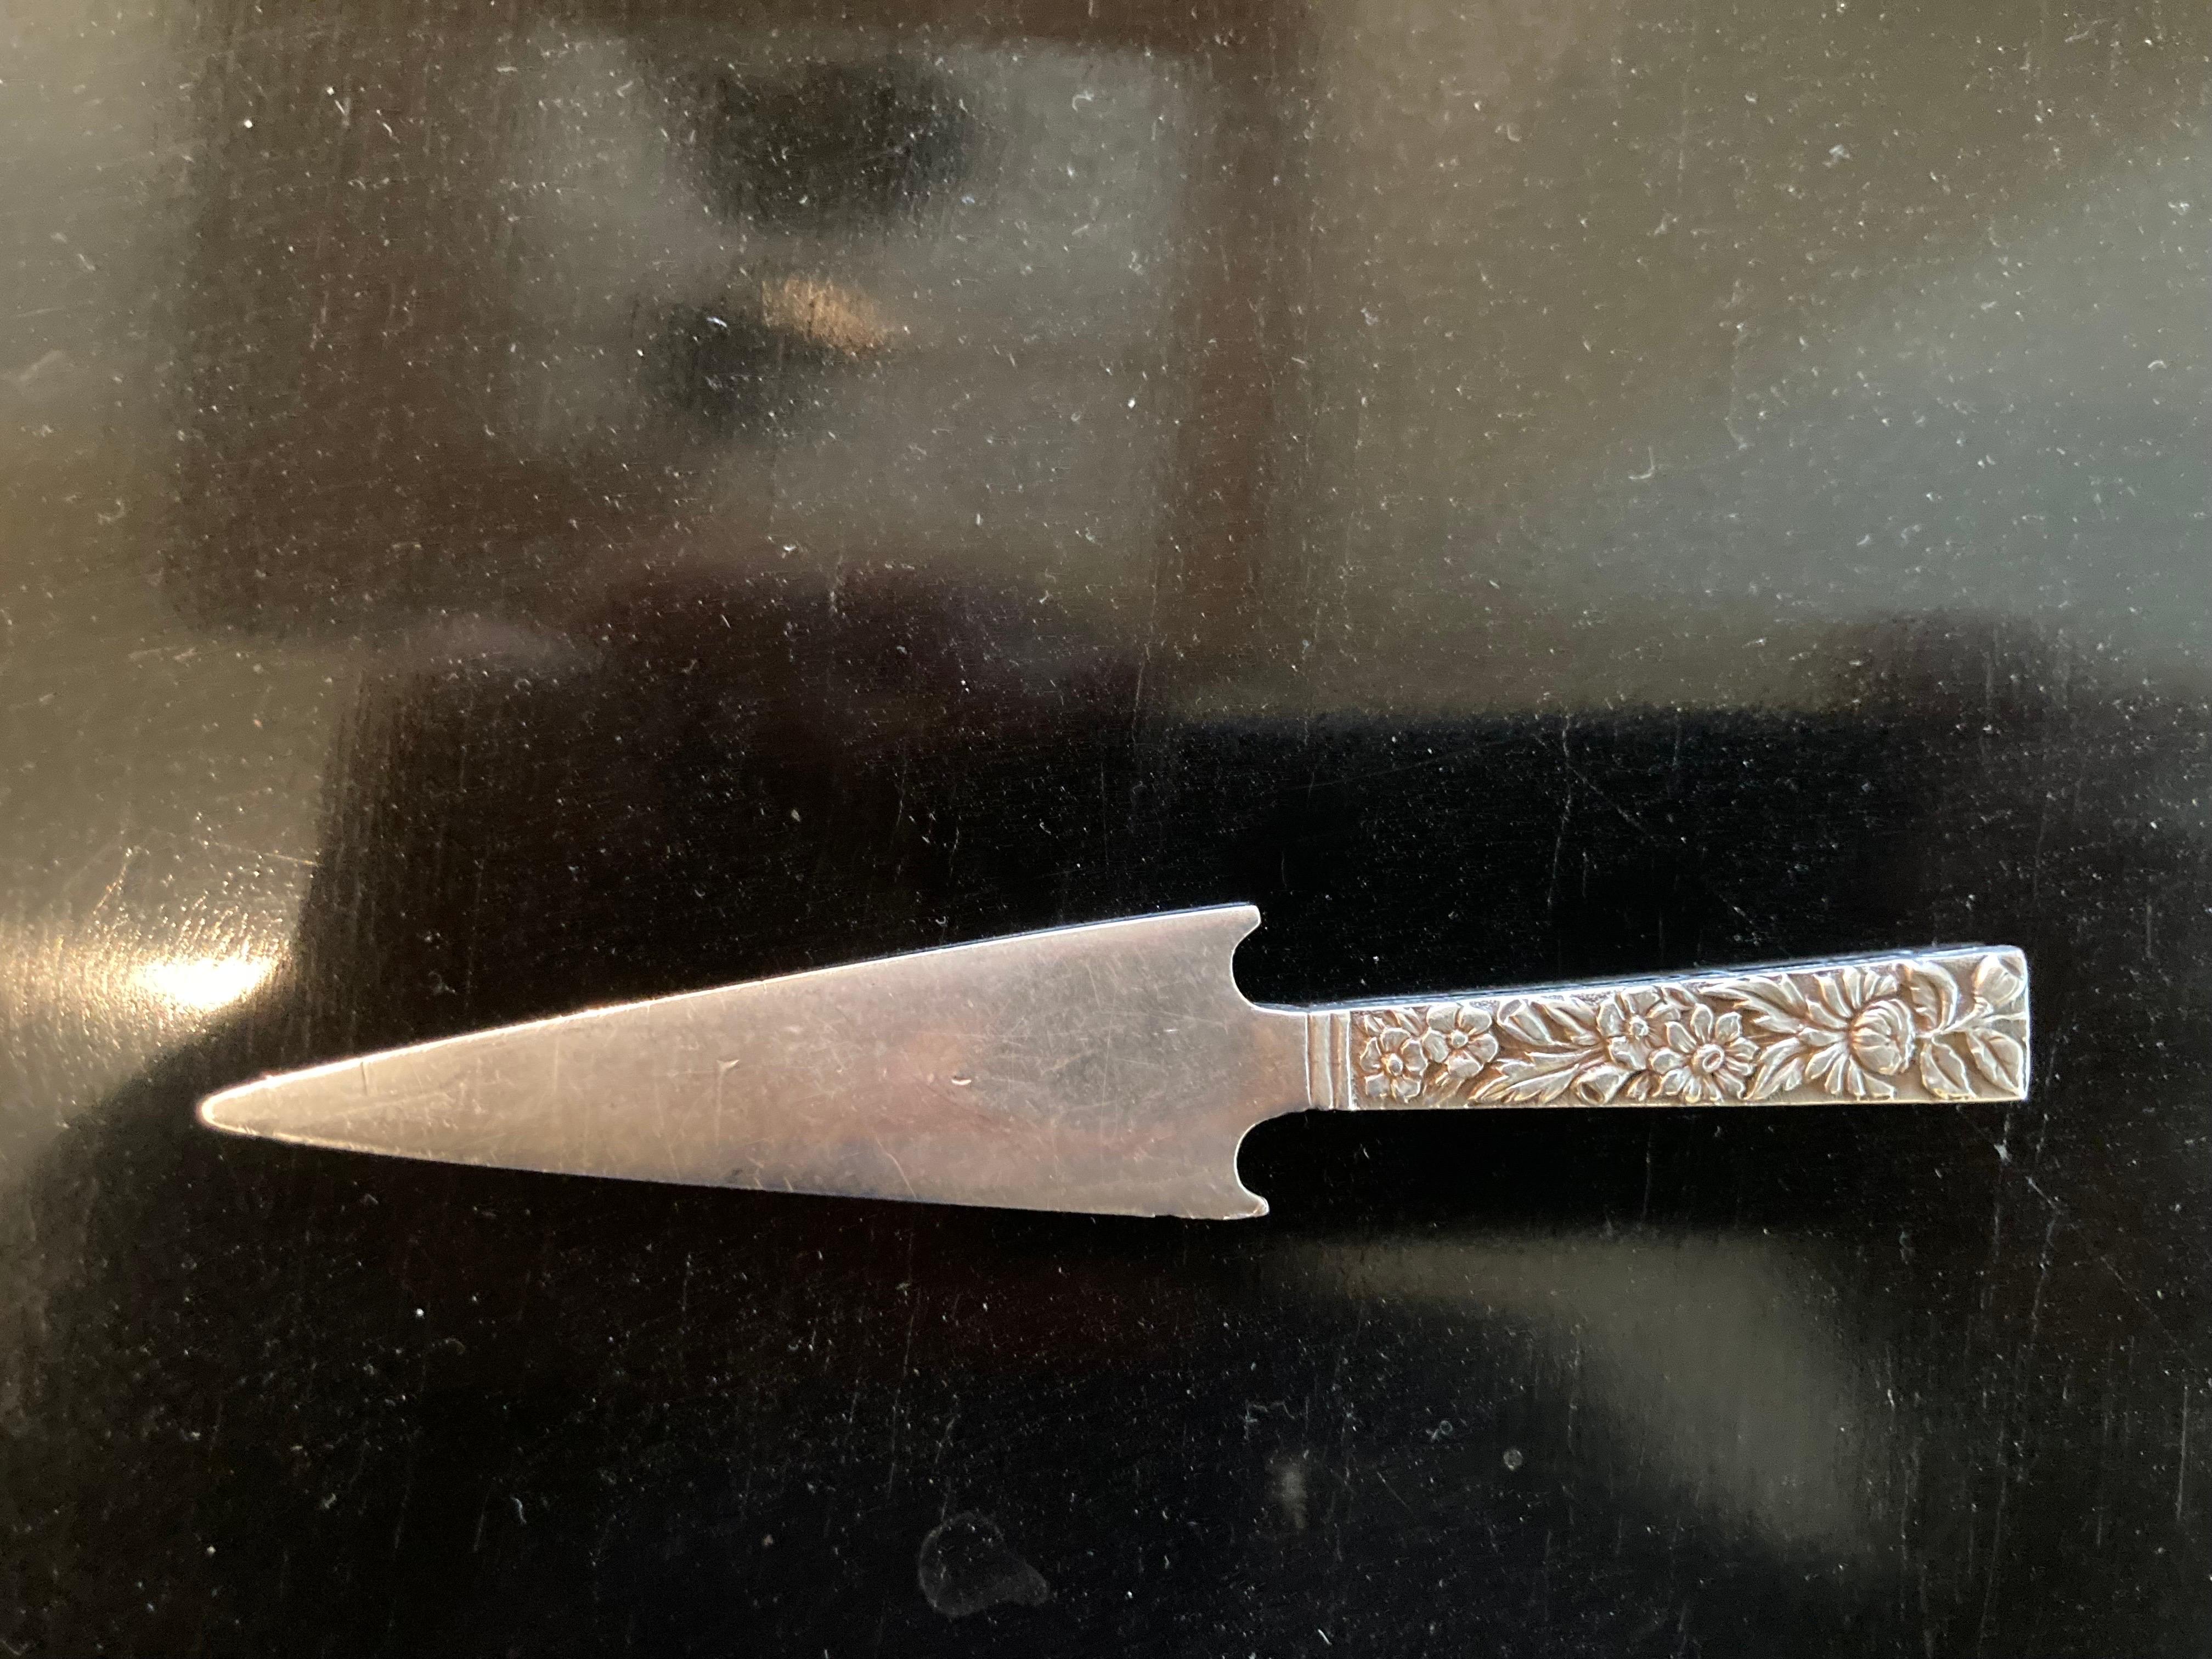 Lovely sterling silver letter opener with floral handle stamped S. Kirk.